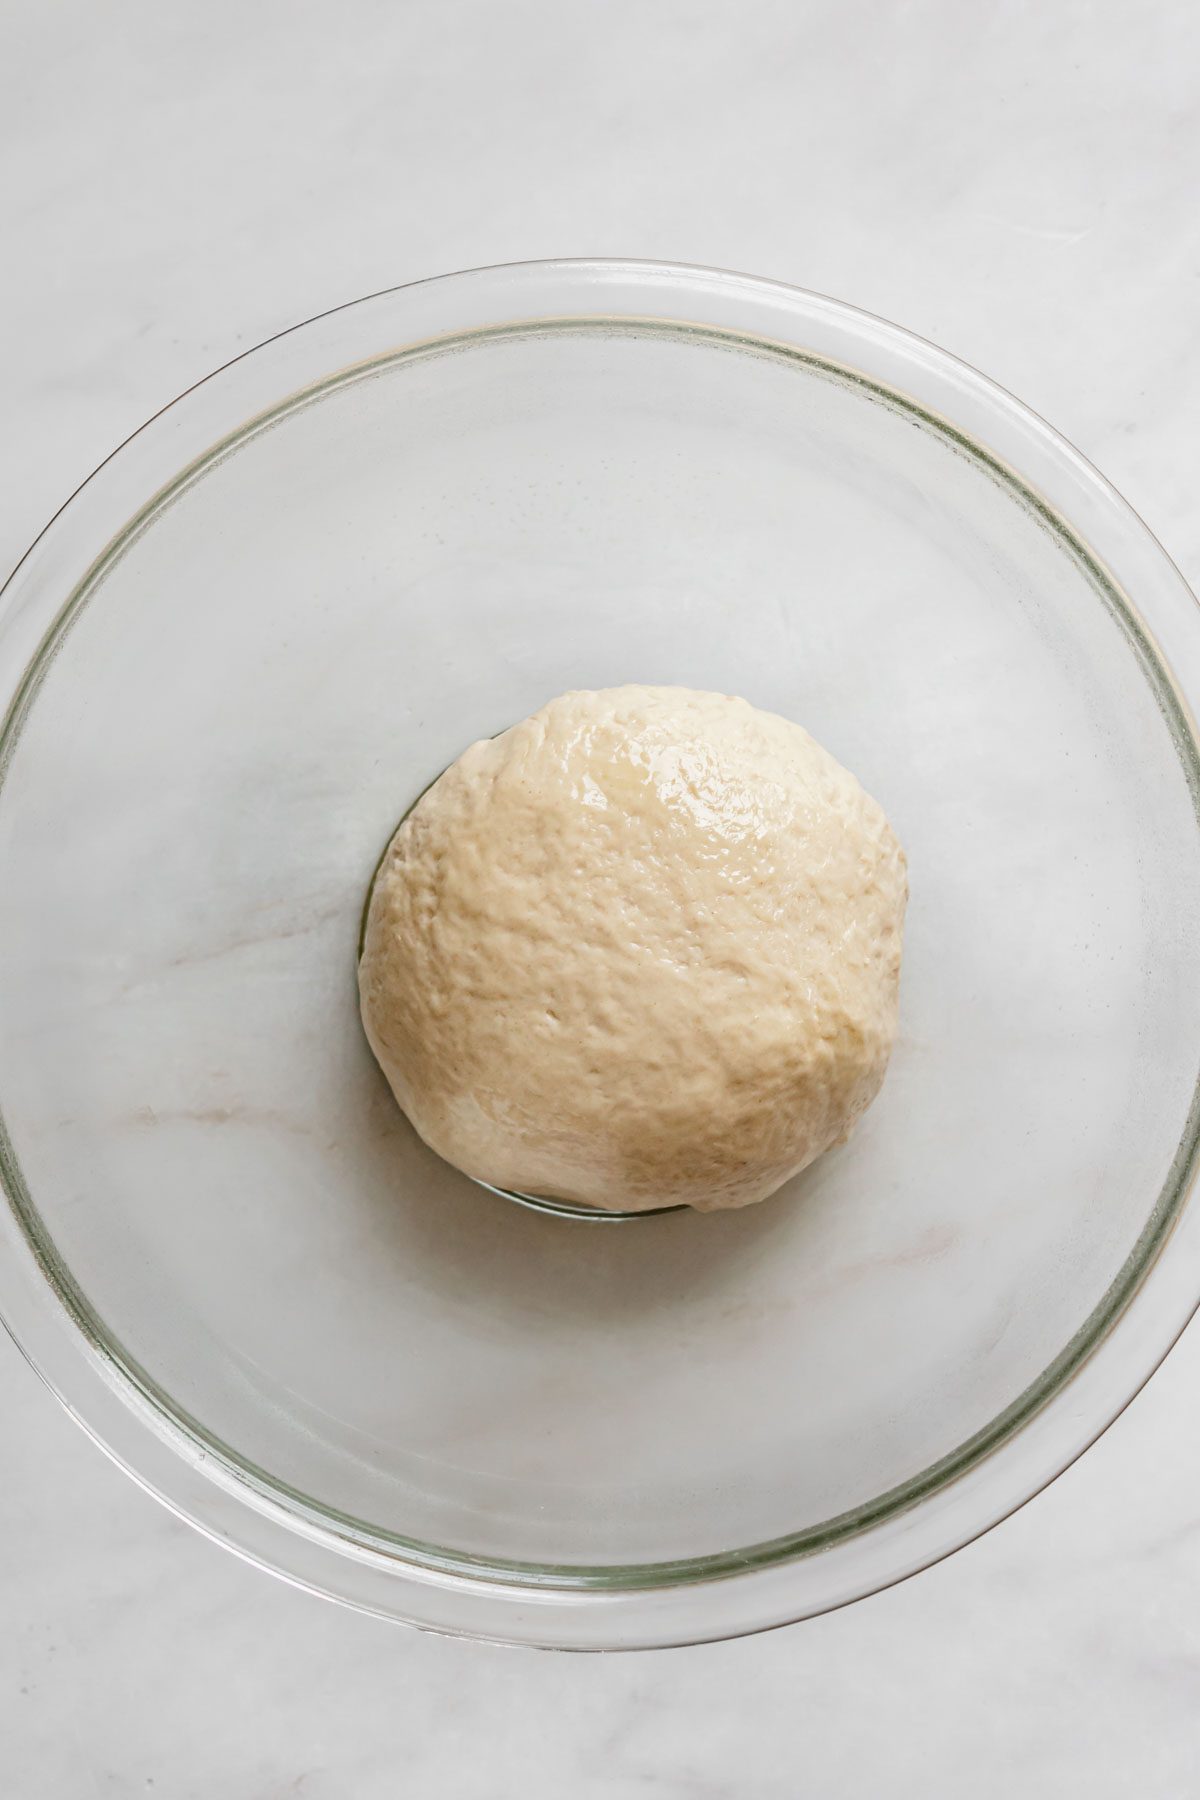 Ball of dough in a greased bowl.